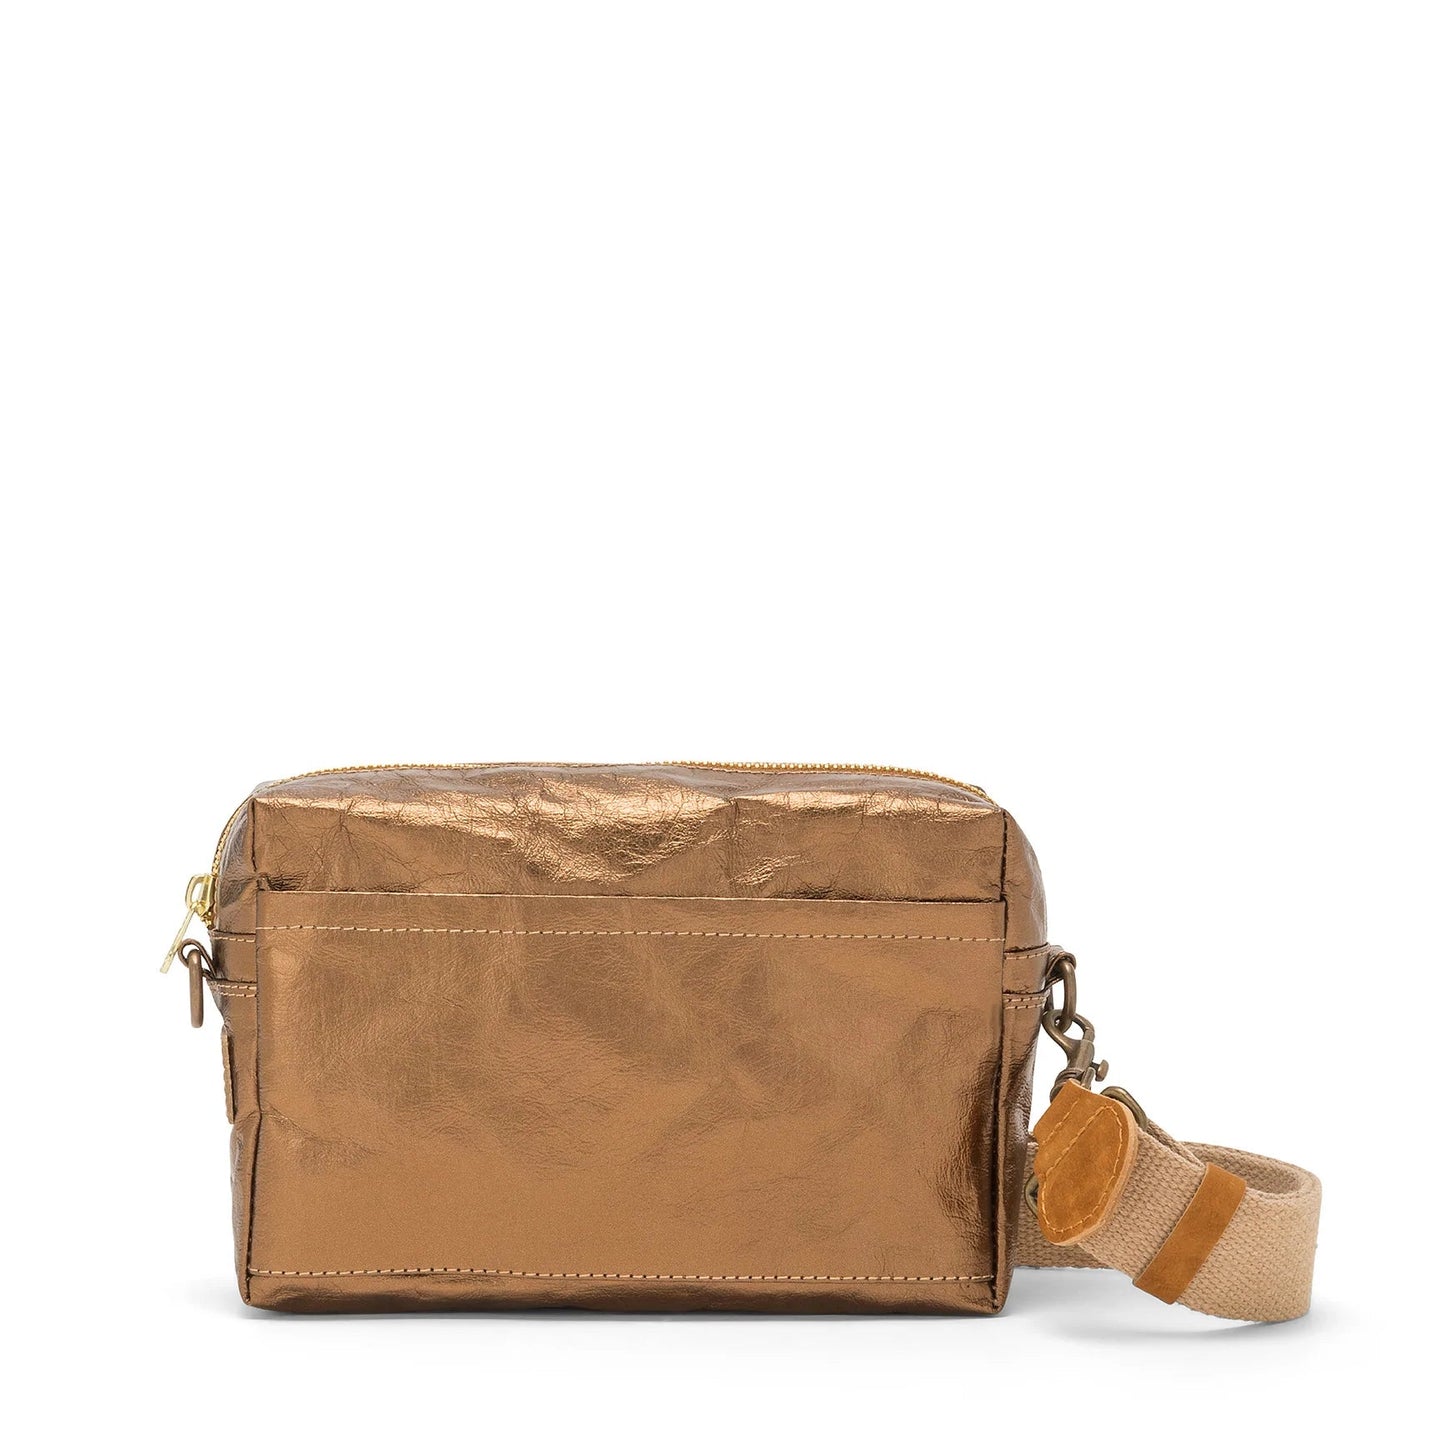 A rectangular washable paper handbag with an external side pocket is shown. The bag has a canvas strap, washable paper details and metal fastening clips to attach the straps to the bag. The bag closes by a zip. The bag shown is metallic bronze with a wheat strap.